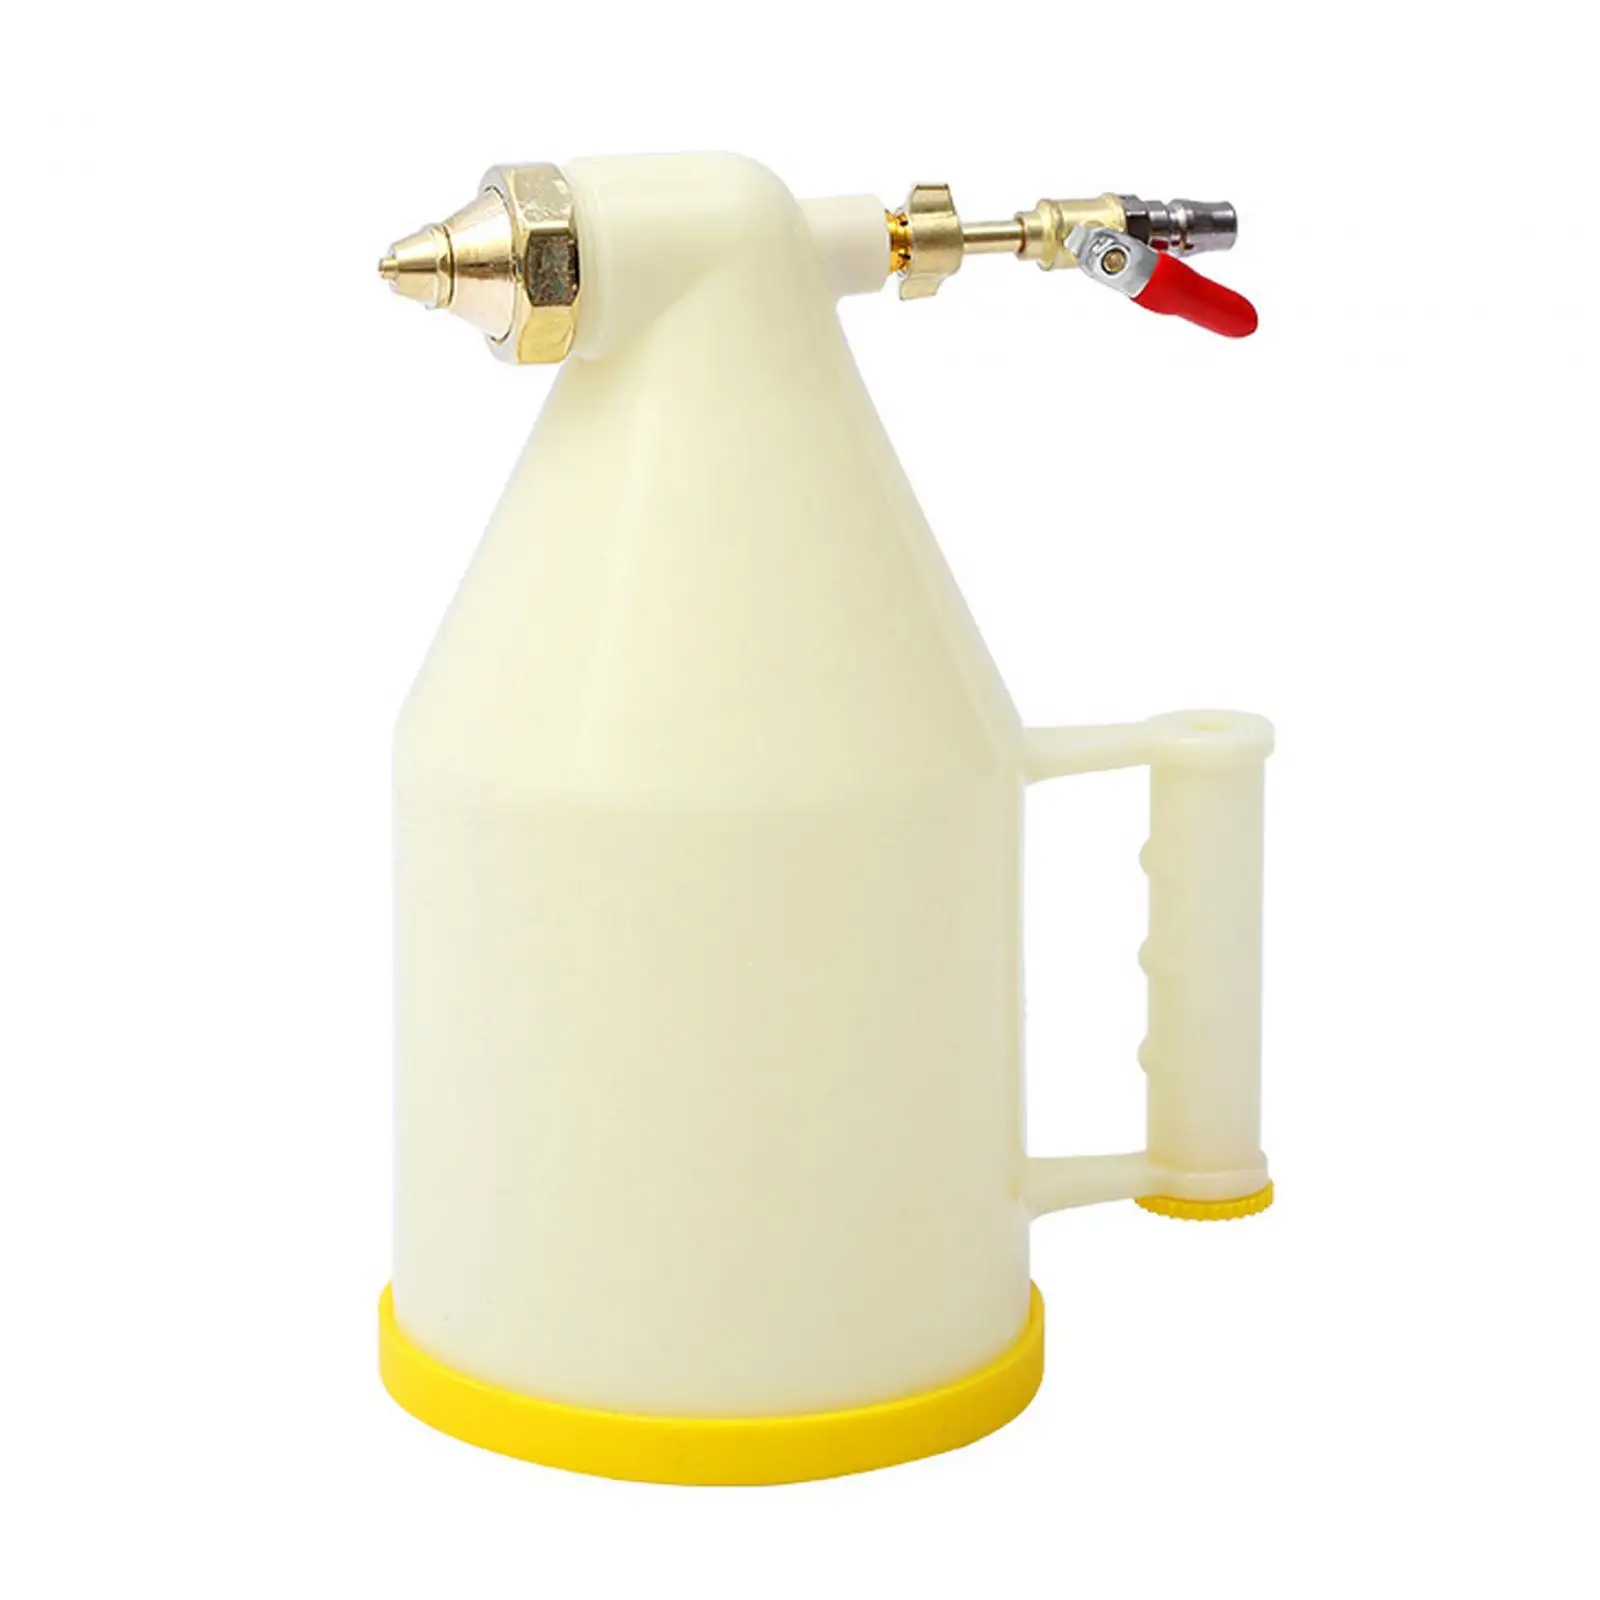 Air Textures Spray Flexible Detachable Multifunctional Hand Pump Lightweight Drywall Wall Painting Sprayer for Ship Accessories